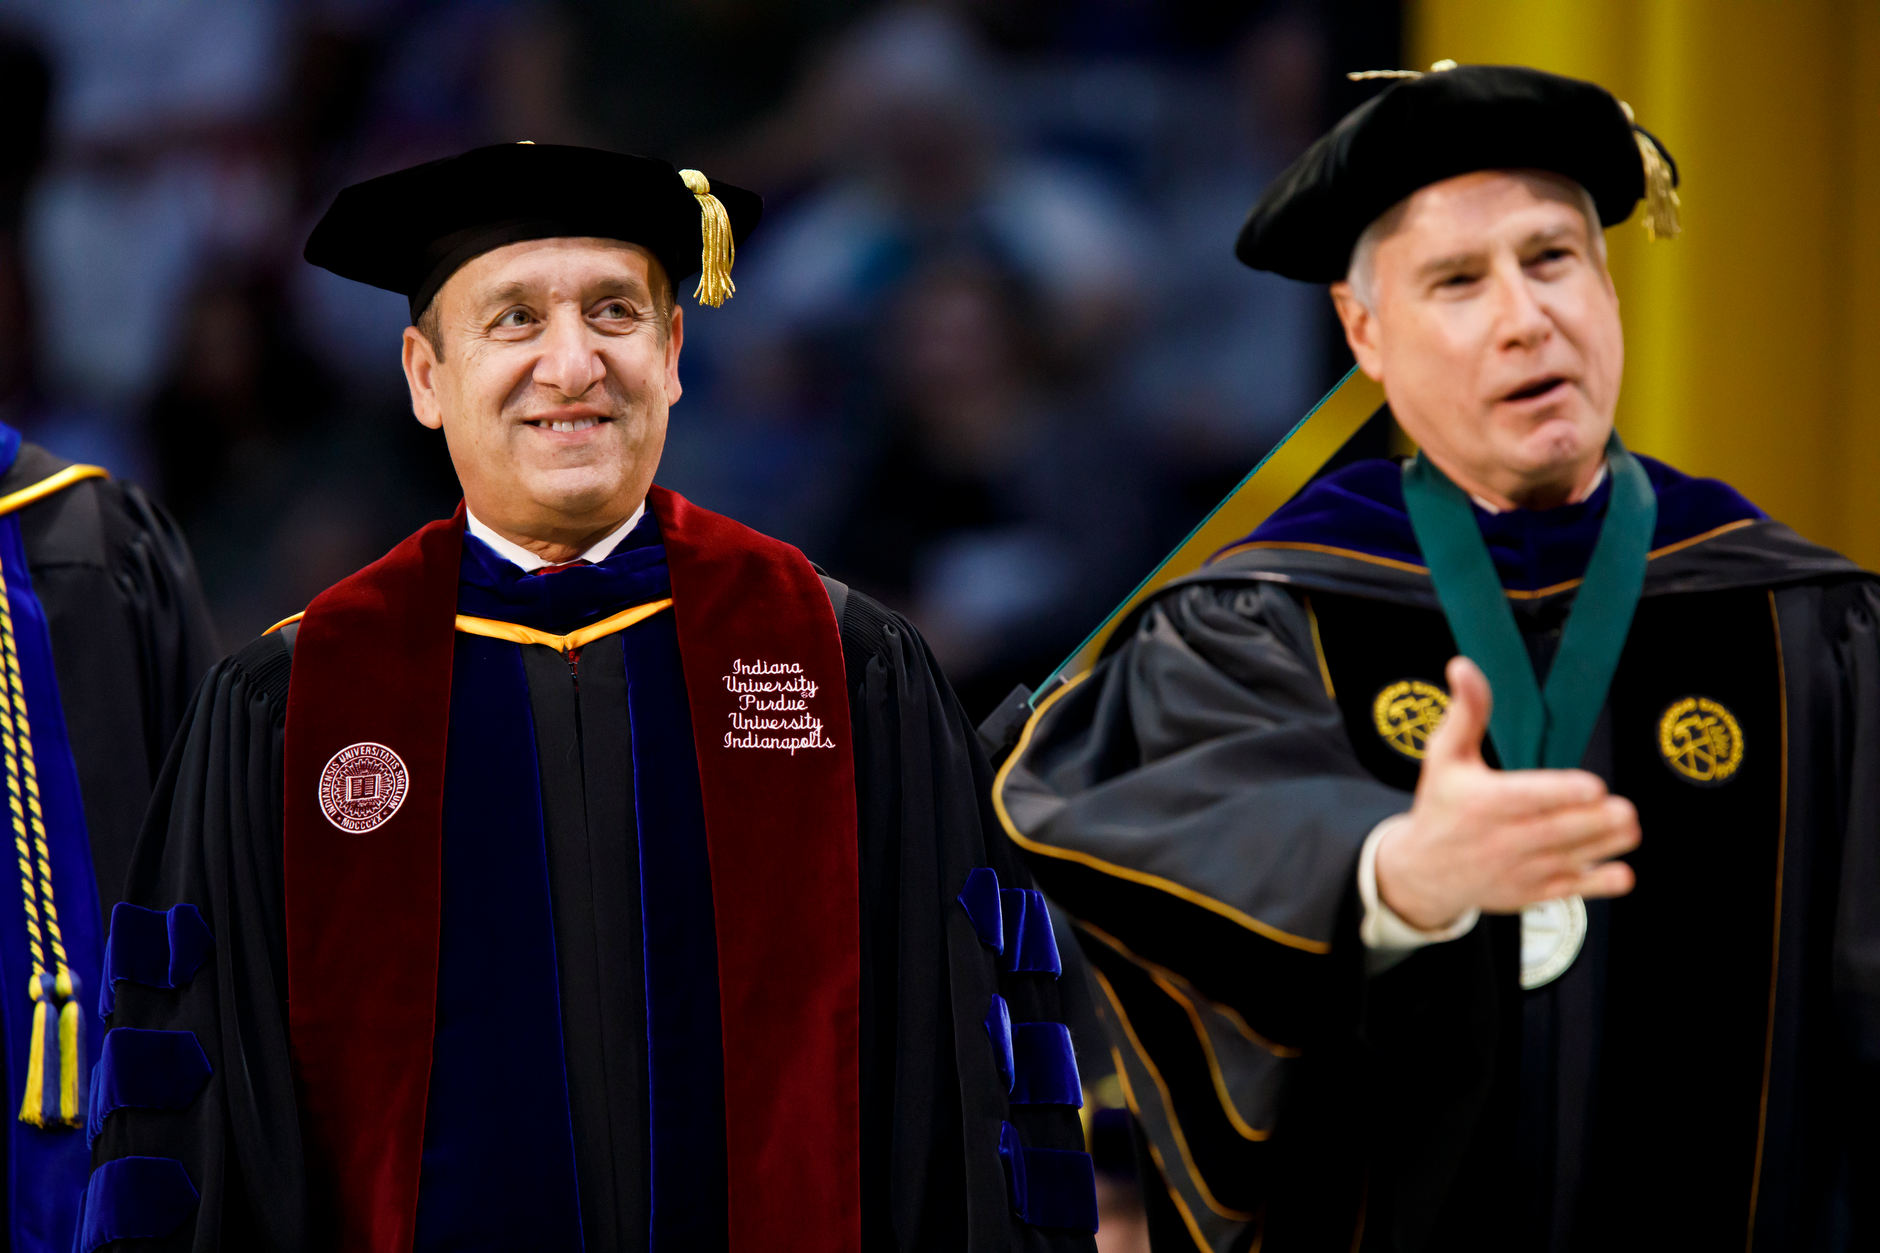 Indiana University Executive Vice President and IUPUI Chancellor Nasser H. Paydar smiles as he greets graduates on stage during the Purdue Fort Wayne and IU Fort Wayne Commencement at the Allen County War Memorial Coliseum on Wednesday, May 8, 2019. (James Brosher/Indiana University)